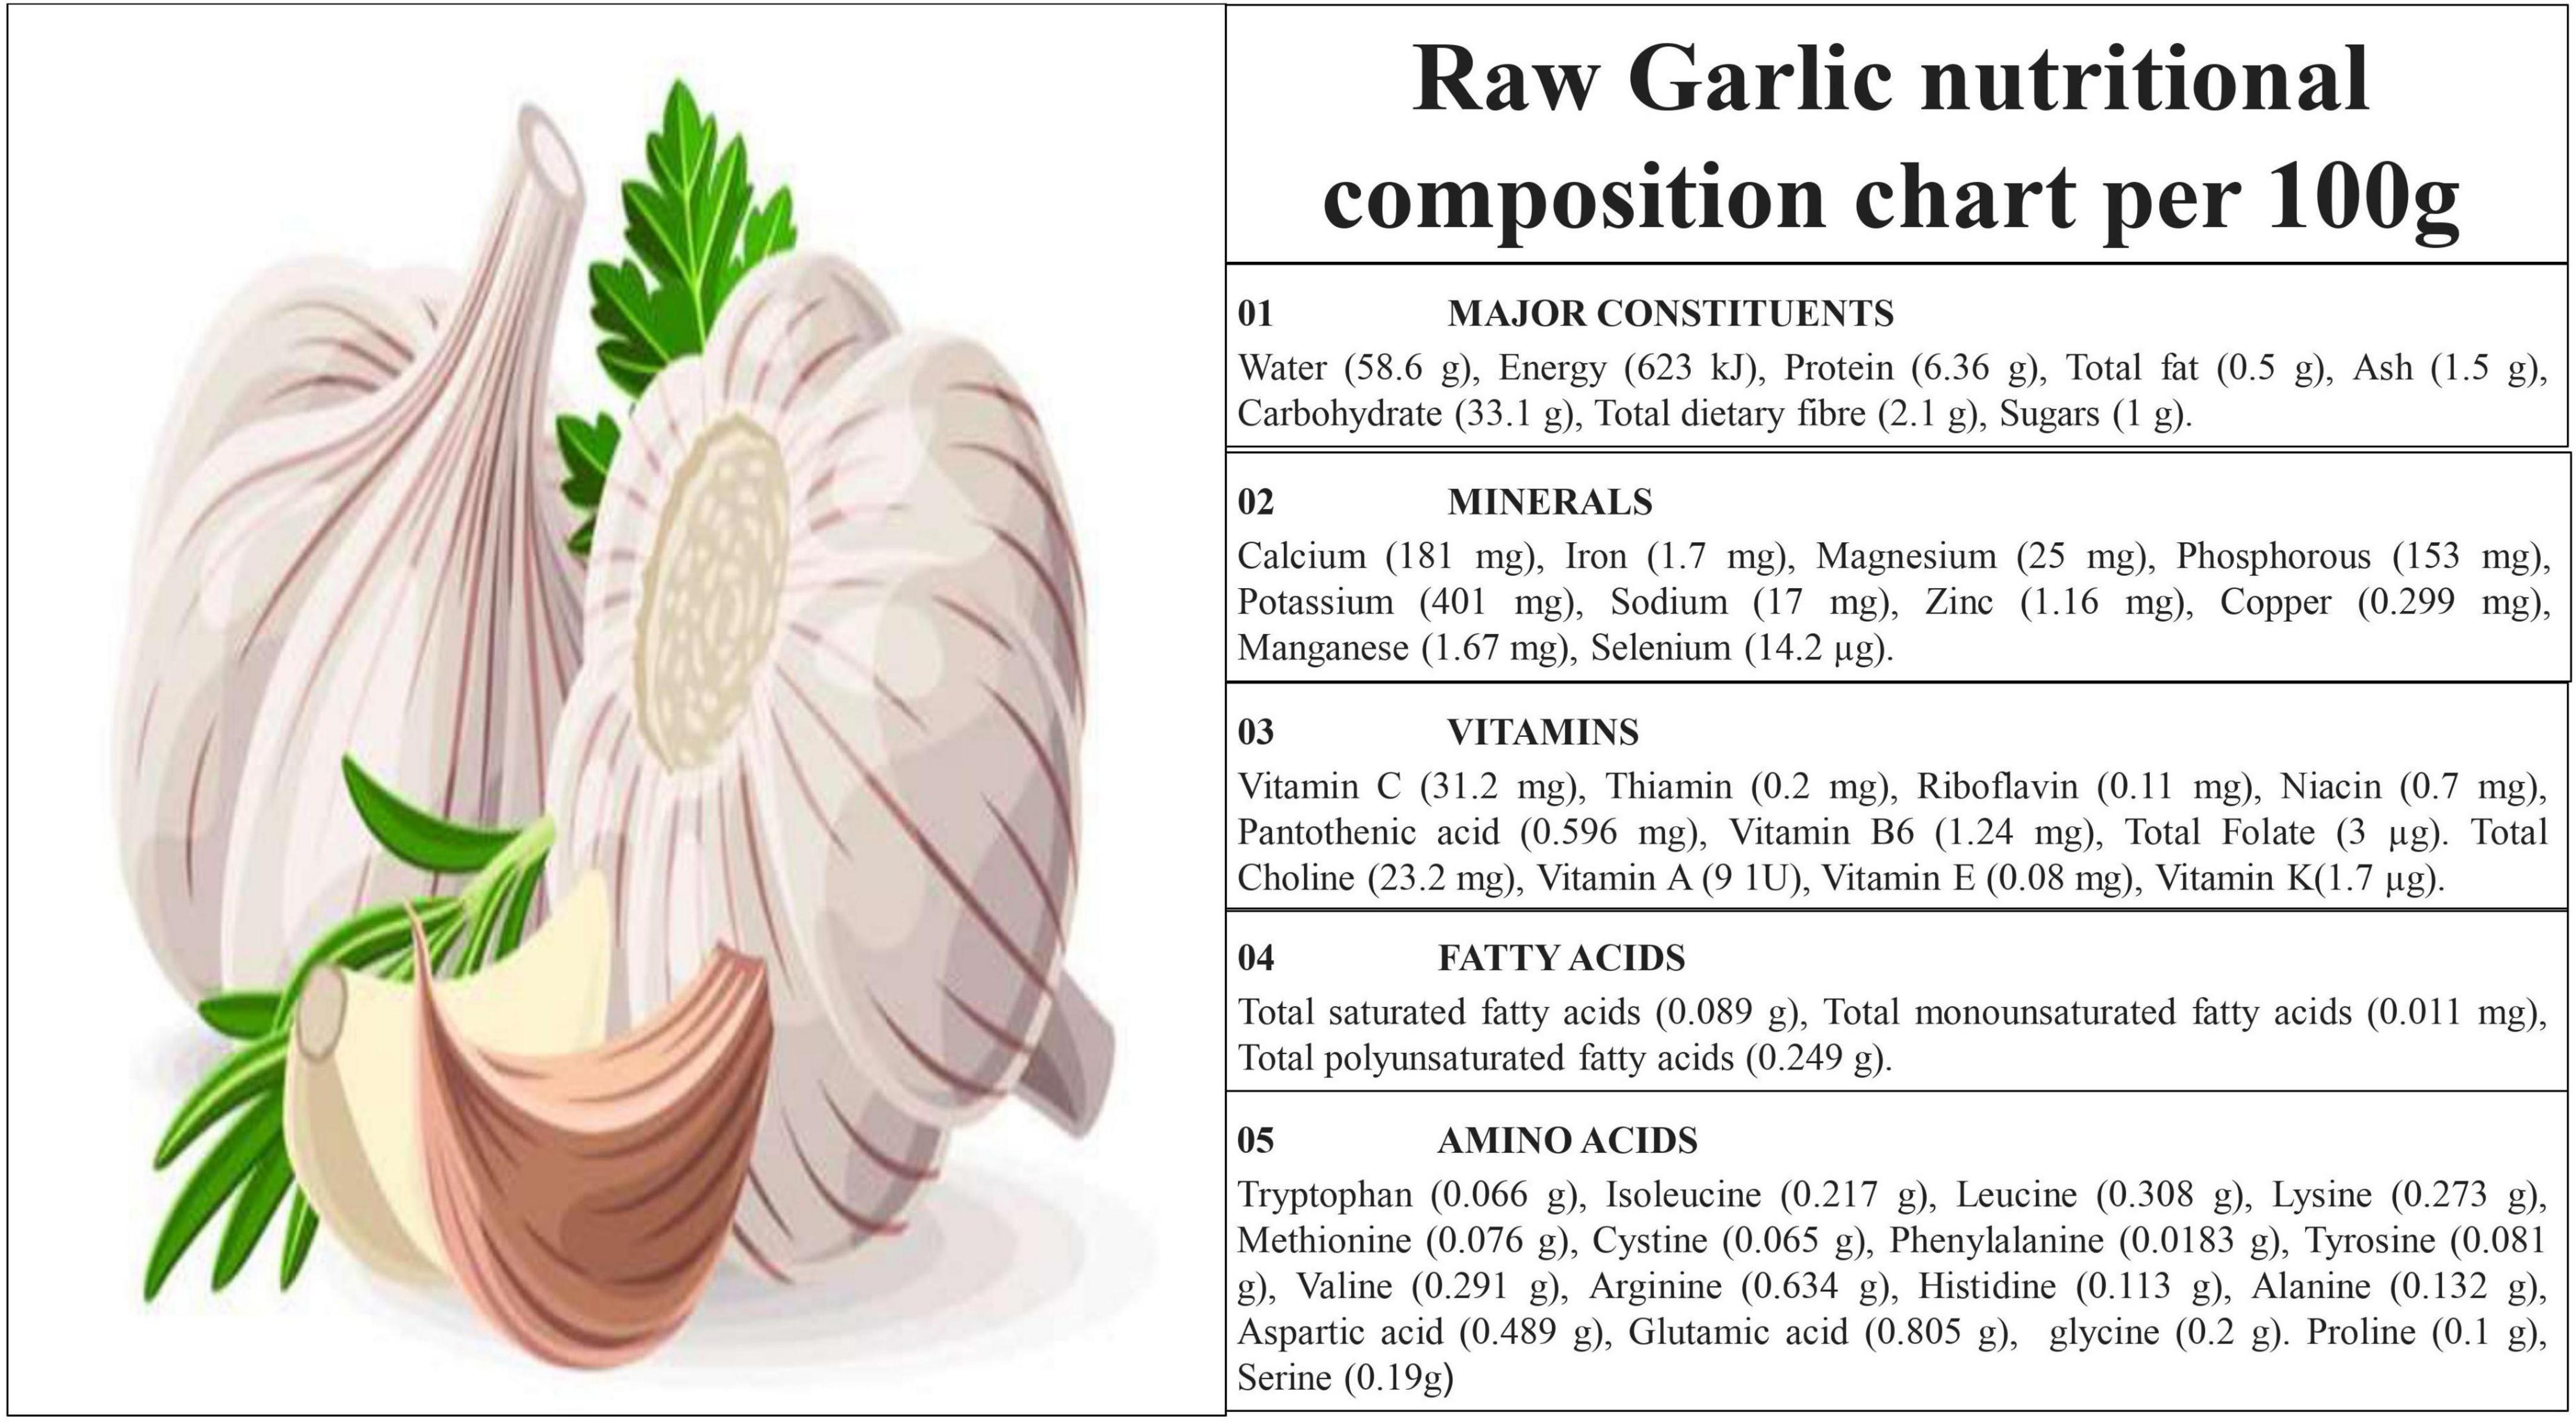 Medicinal and therapeutic properties of garlic, garlic essential oil, and garlic-based snack food: An updated review